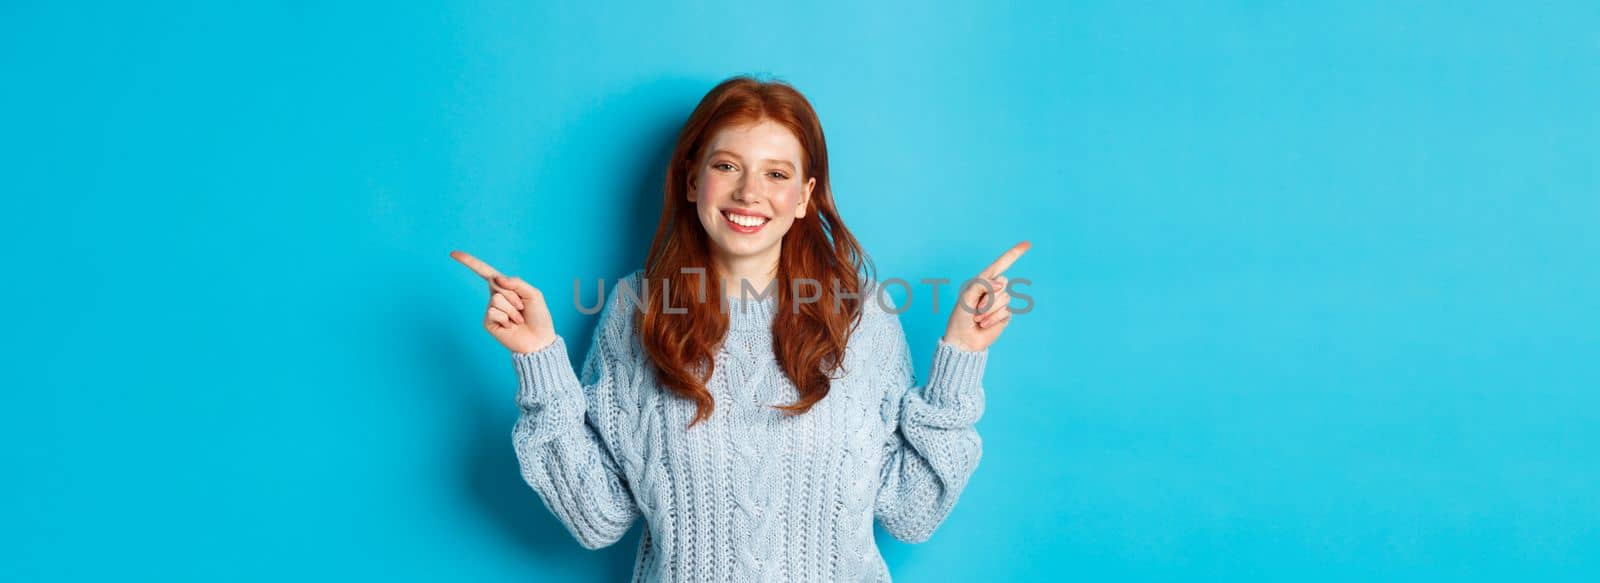 Winter holidays and people concept. Cute teen girl with red hair, smiling and pointing fingers sideways, showing advertisements, standing over blue background.